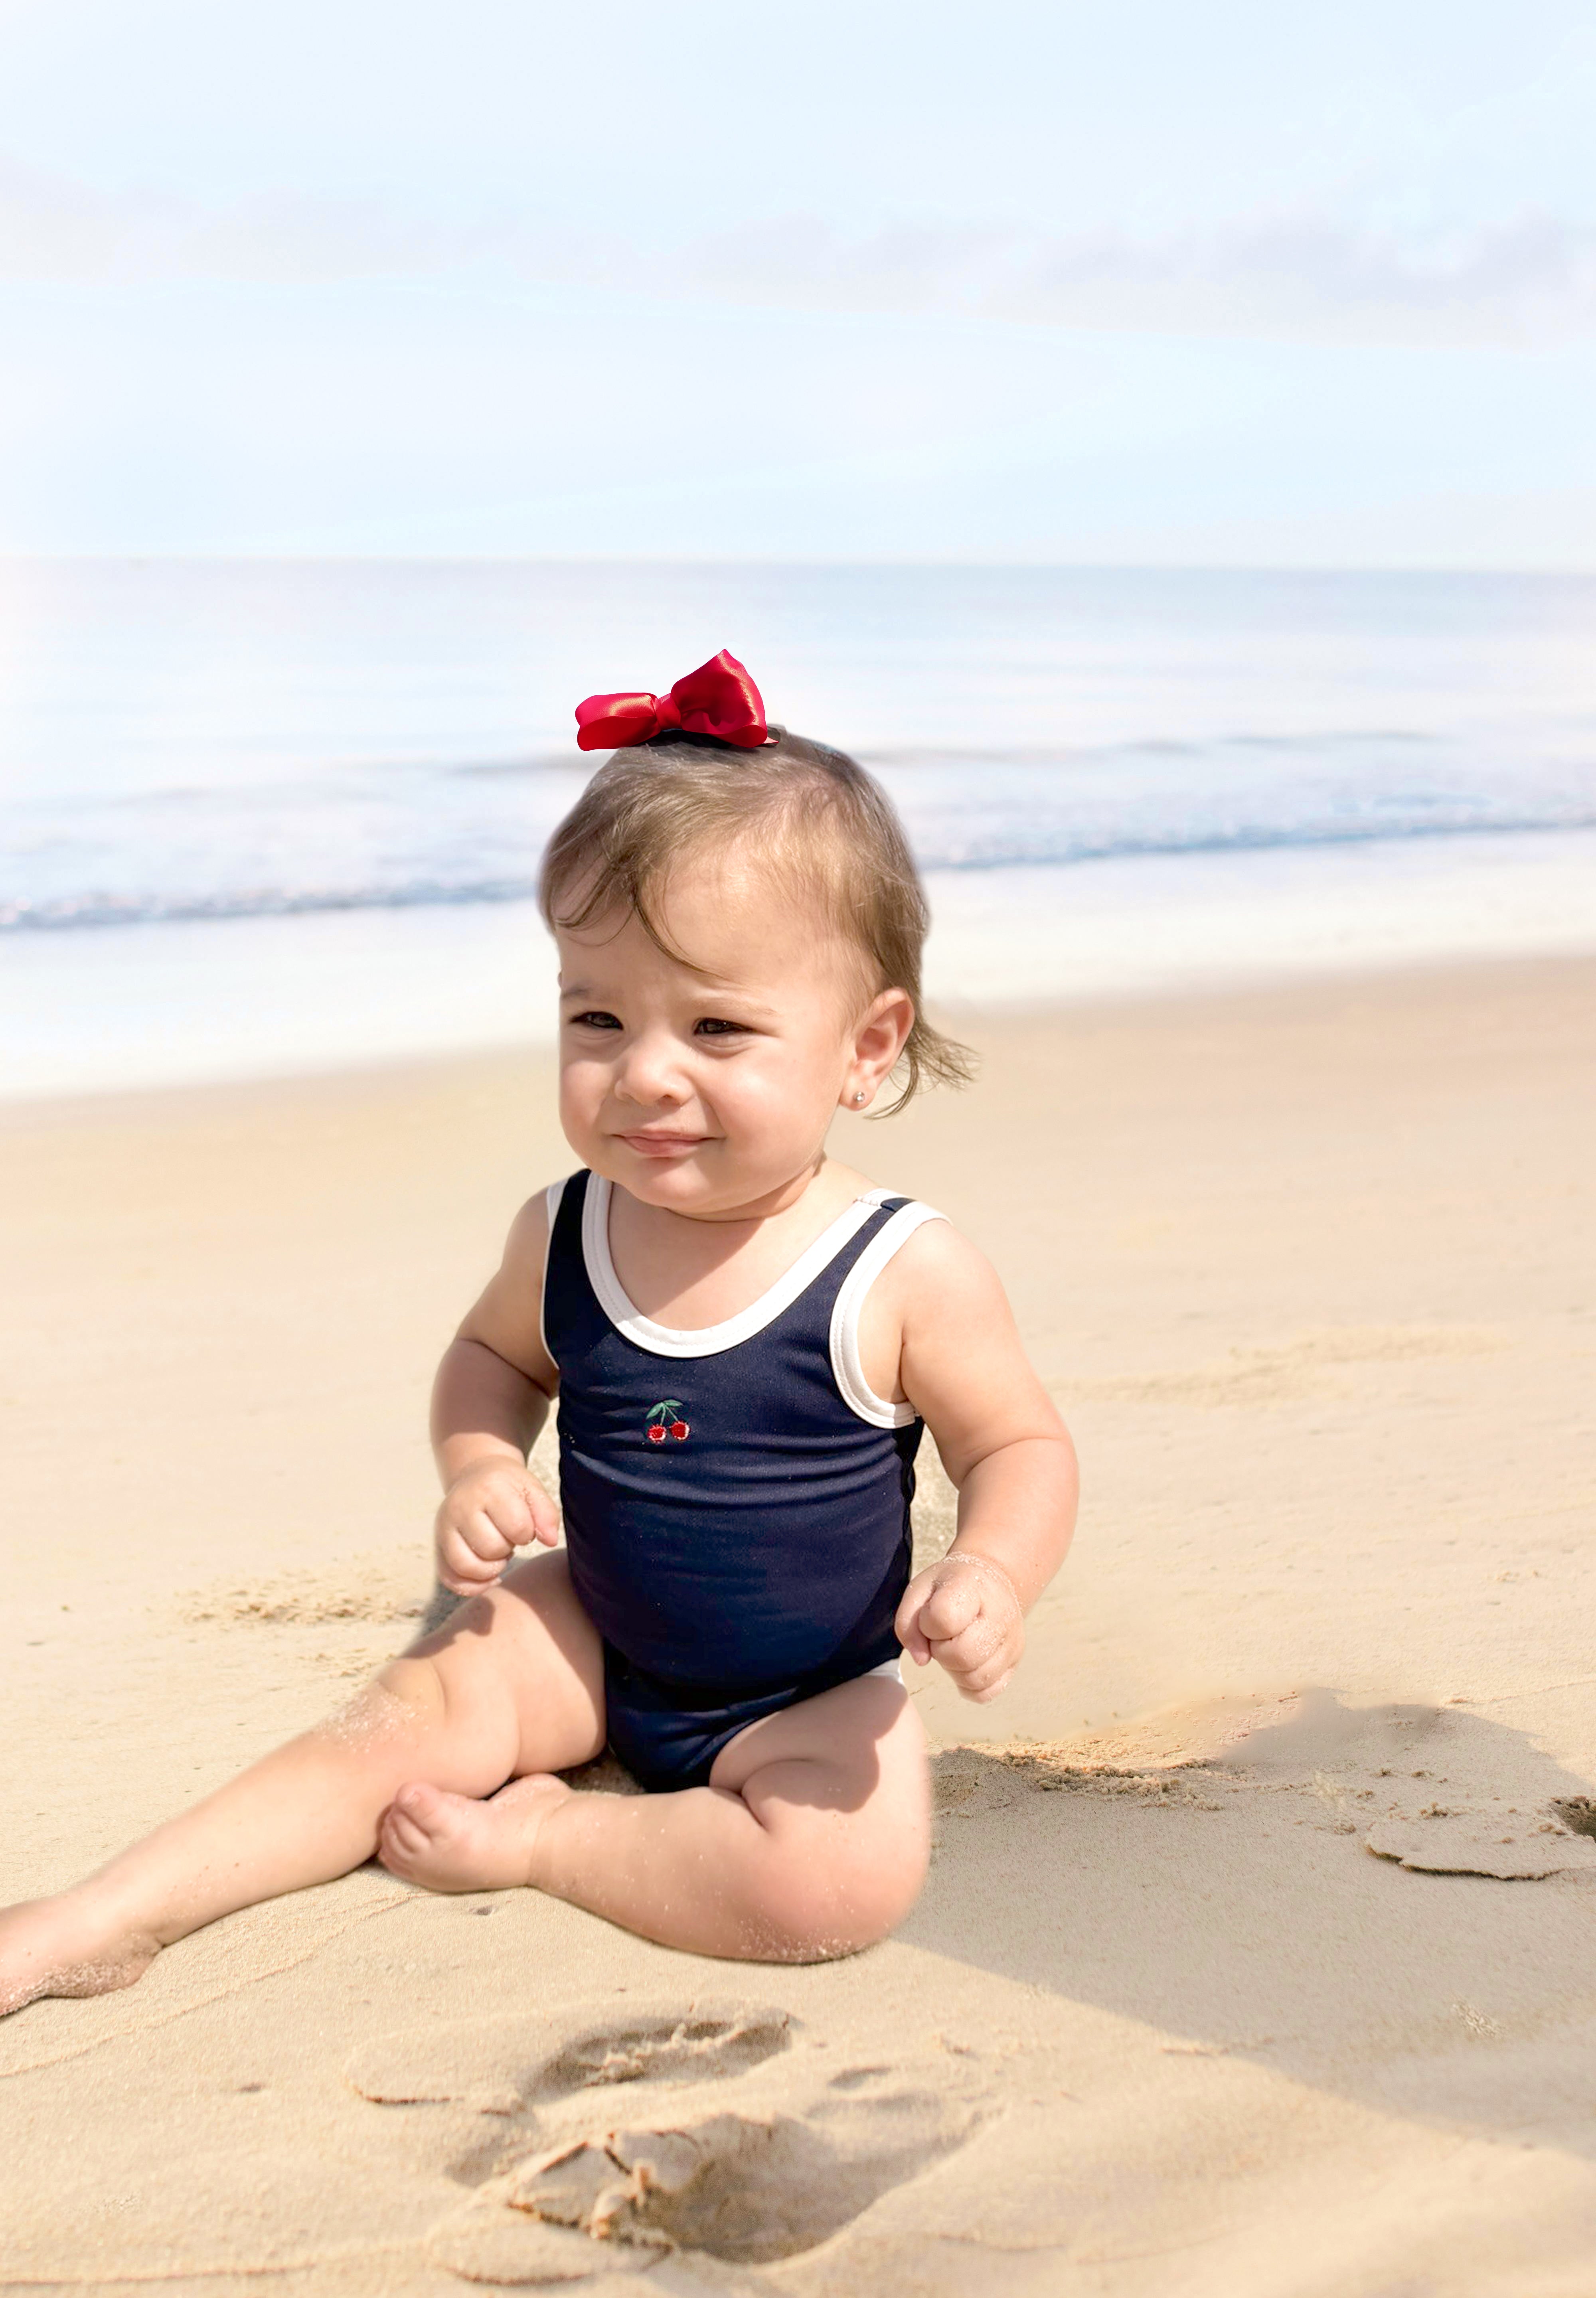 Navy Bathingsuit With Cherry Embroidery